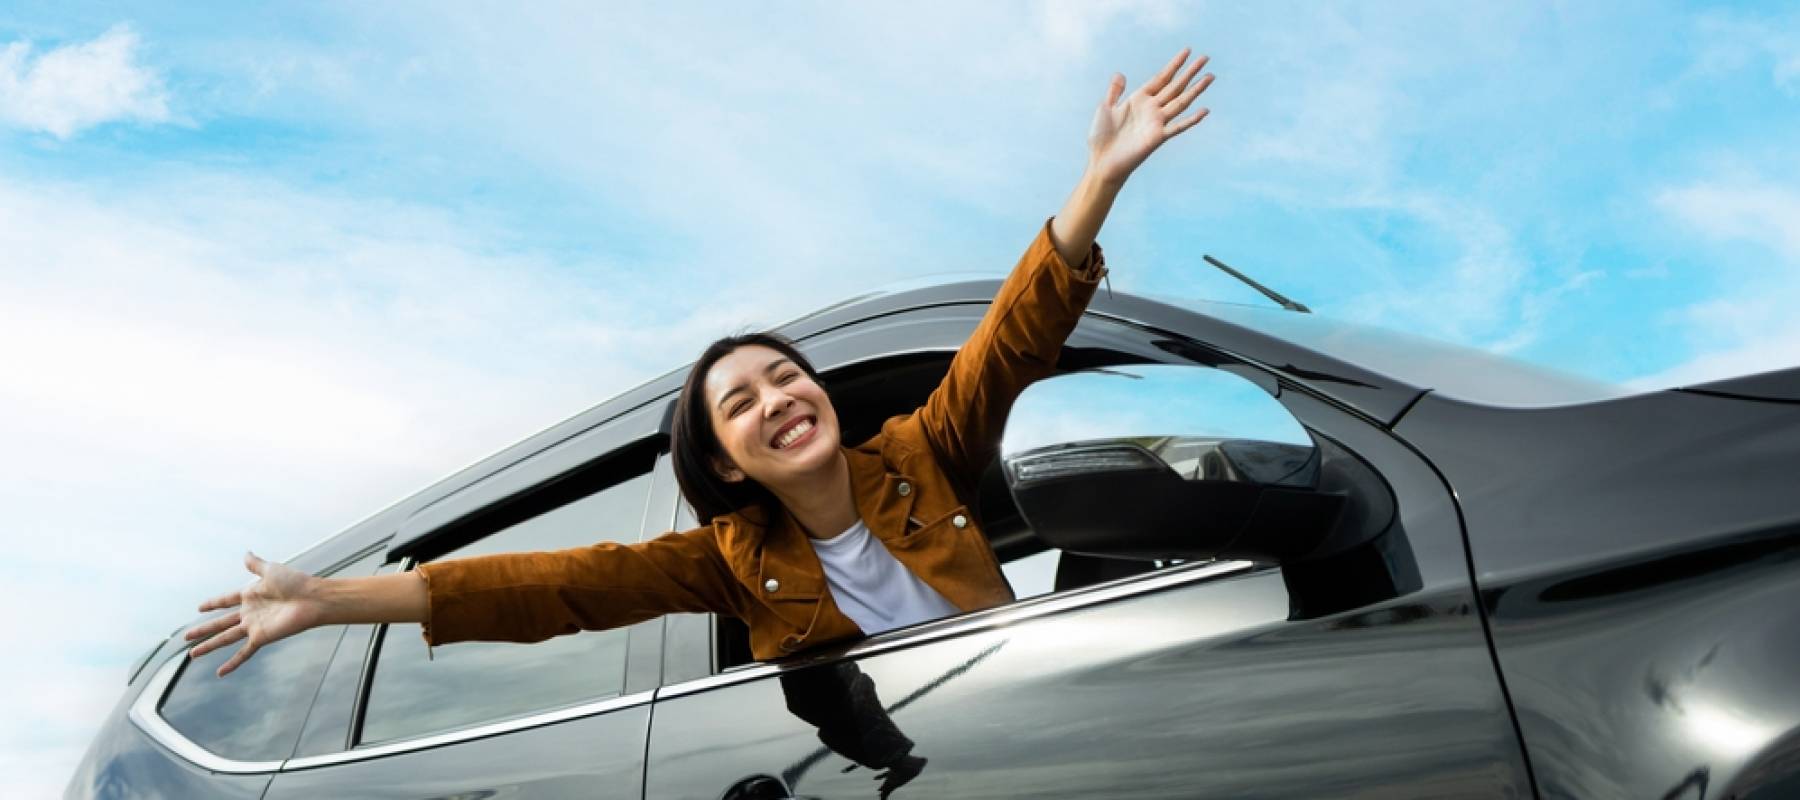 WOman hanging outside of car and is very happy